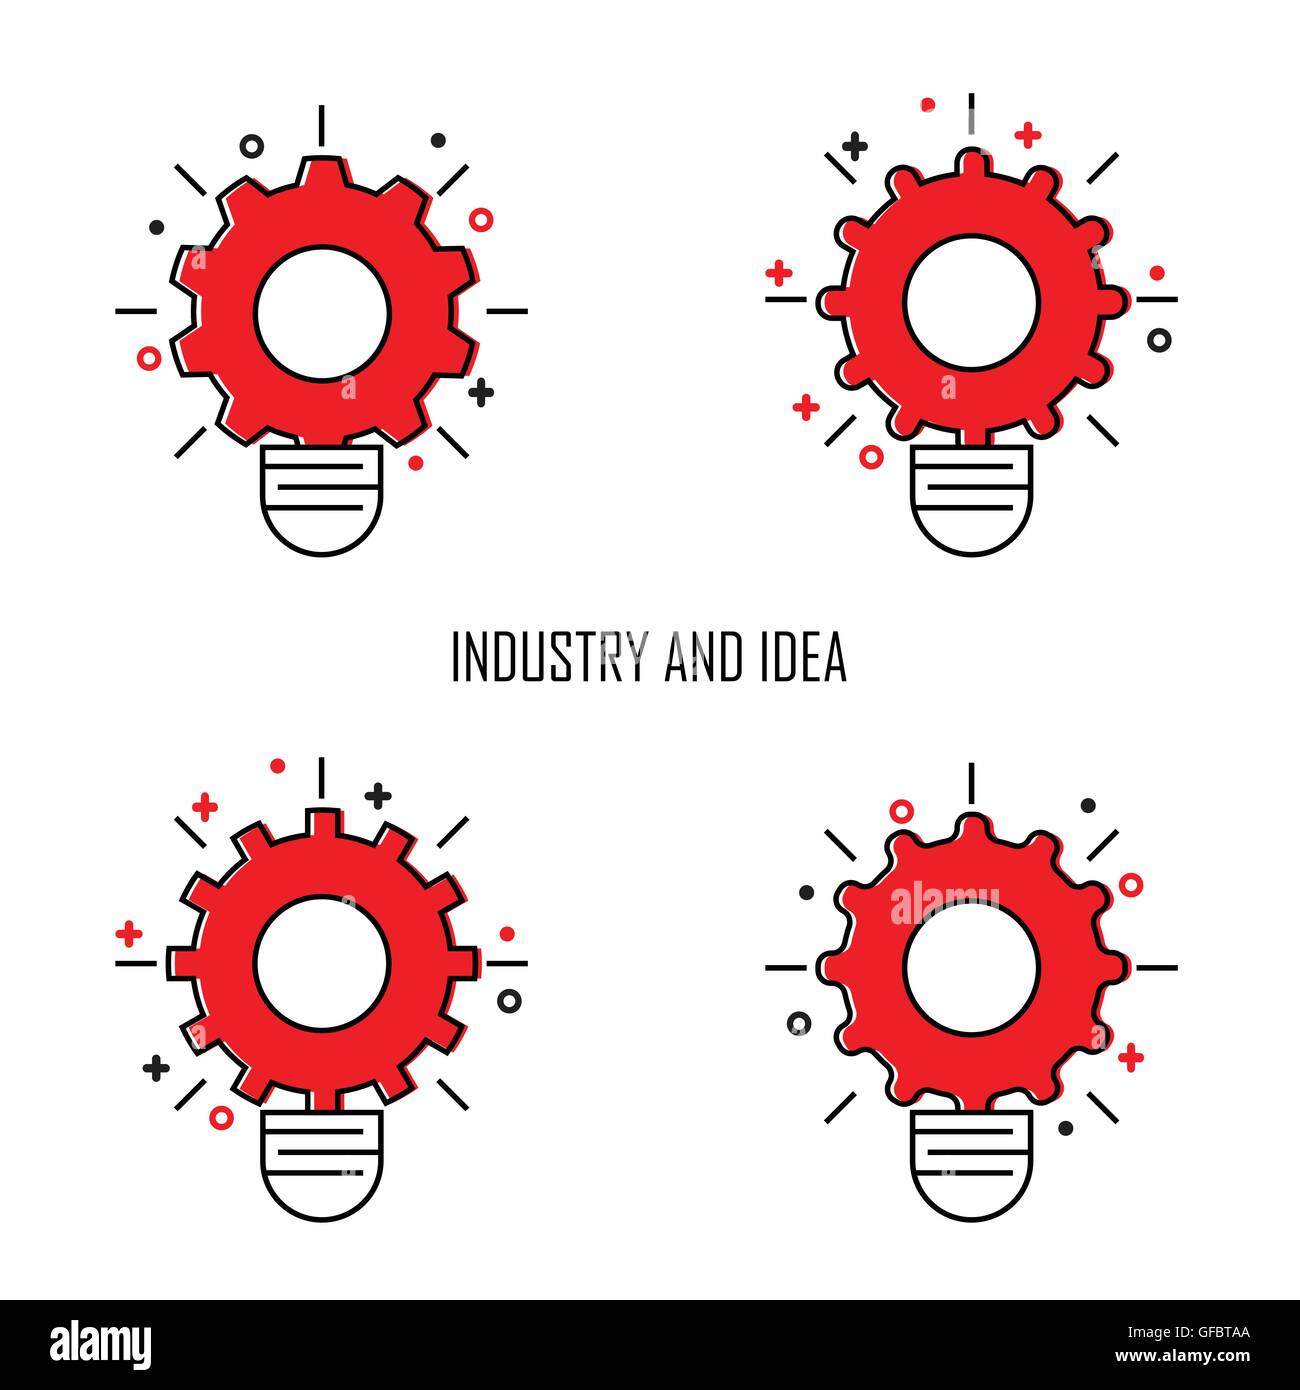 Creative Light Bulb and Gear Icon concept background.Design for poster,flyer,cover,brochure.Business and Industrial Idea. Stock Vector